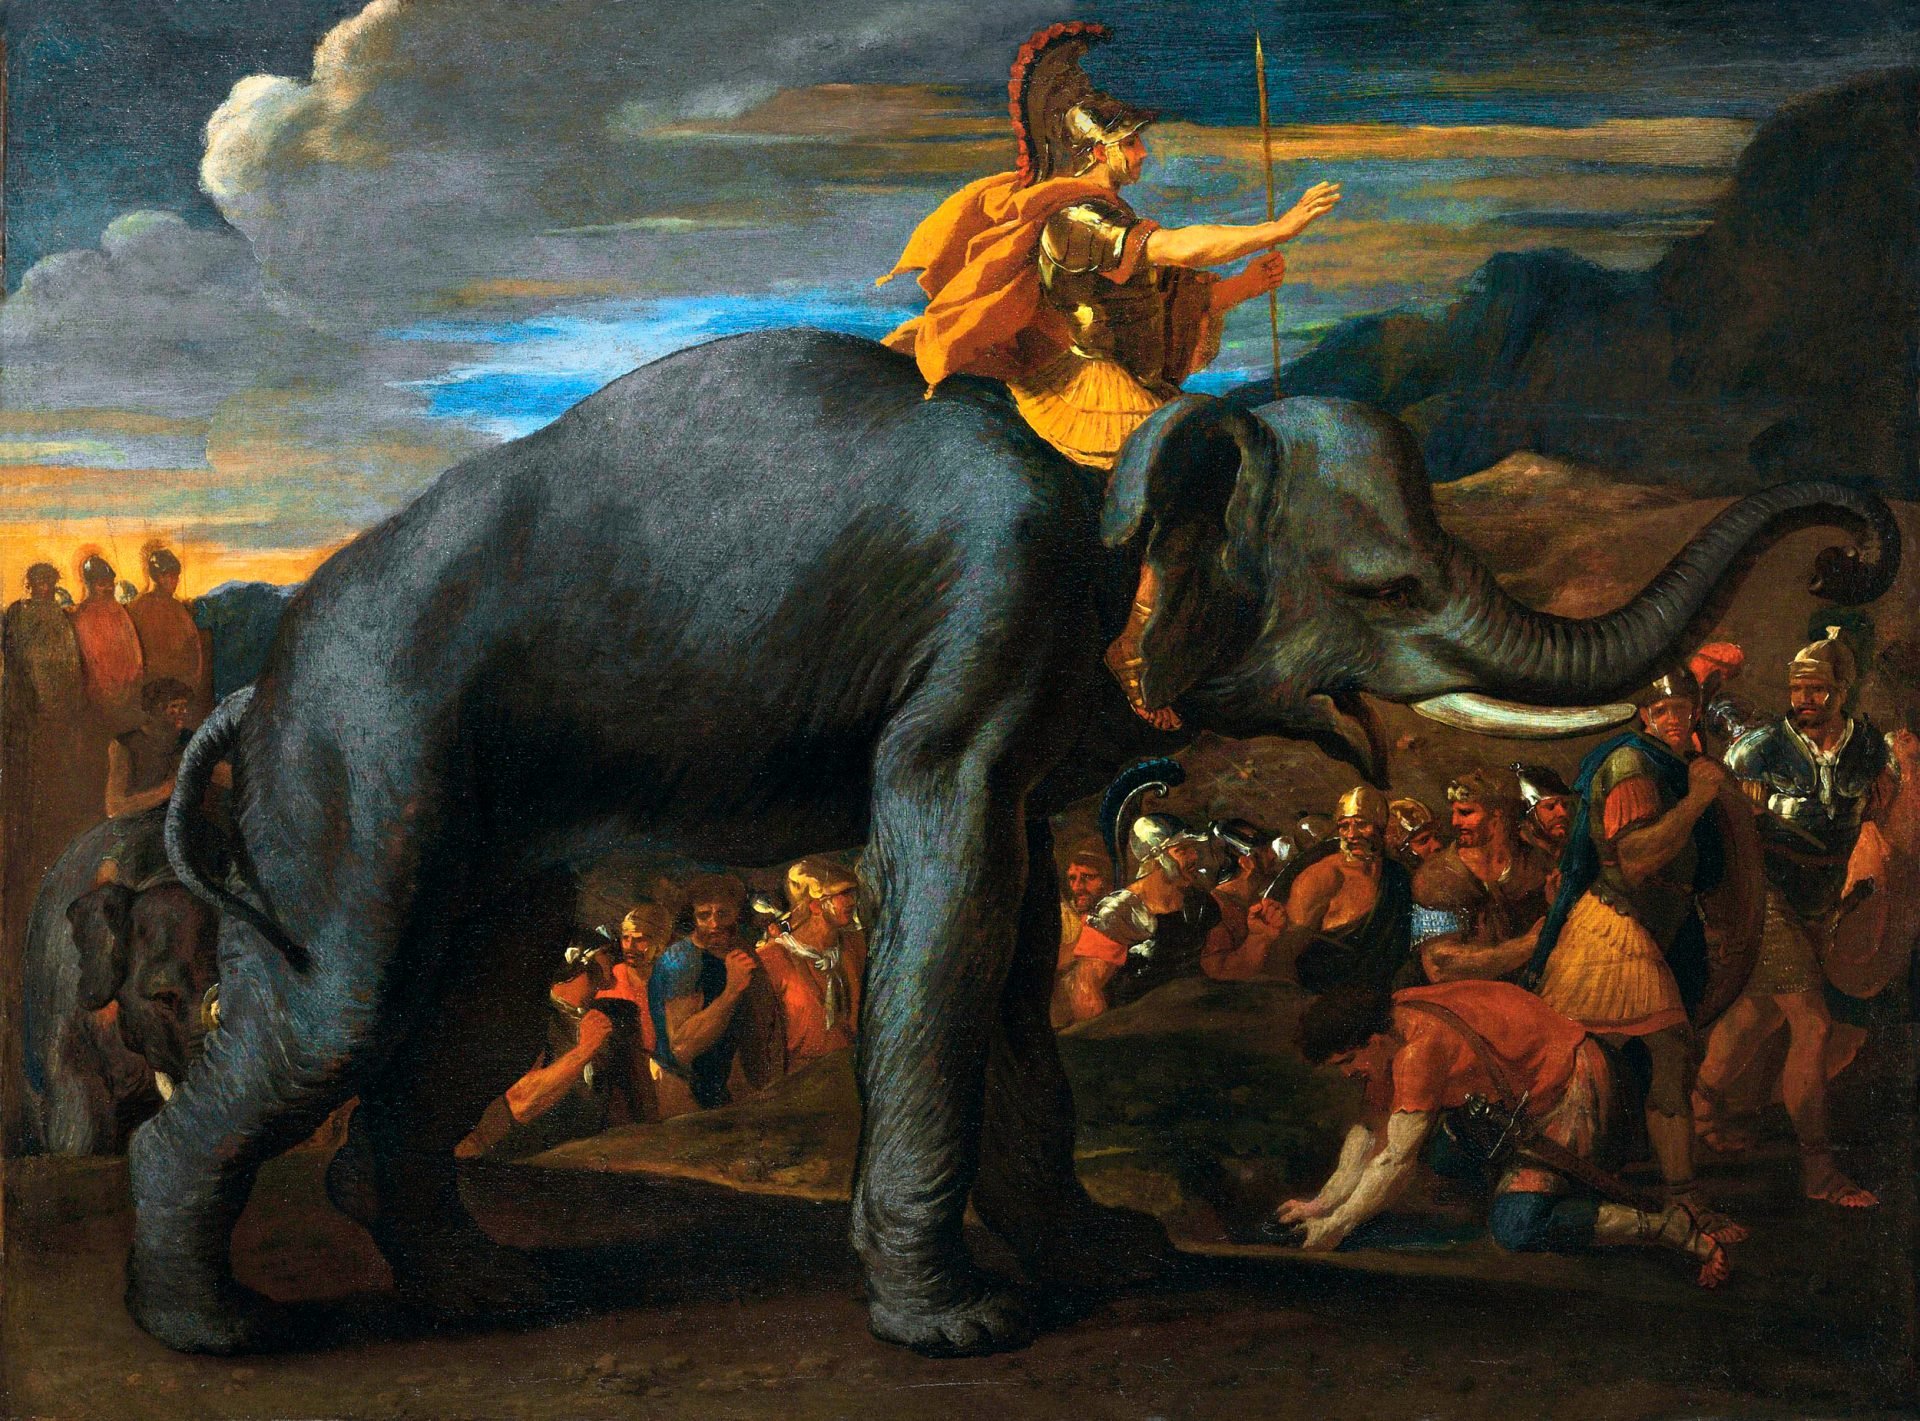 Dramatic painting by Nicolas Poussin depicting Hannibal, adorned in armor and a golden cape, confidently leading his troops while riding atop a massive elephant. Soldiers, some in awe and others struggling, accompany him amidst a rugged mountainous landscape, with a moody sky overhead suggesting the challenges faced during the legendary crossing of the Alps.